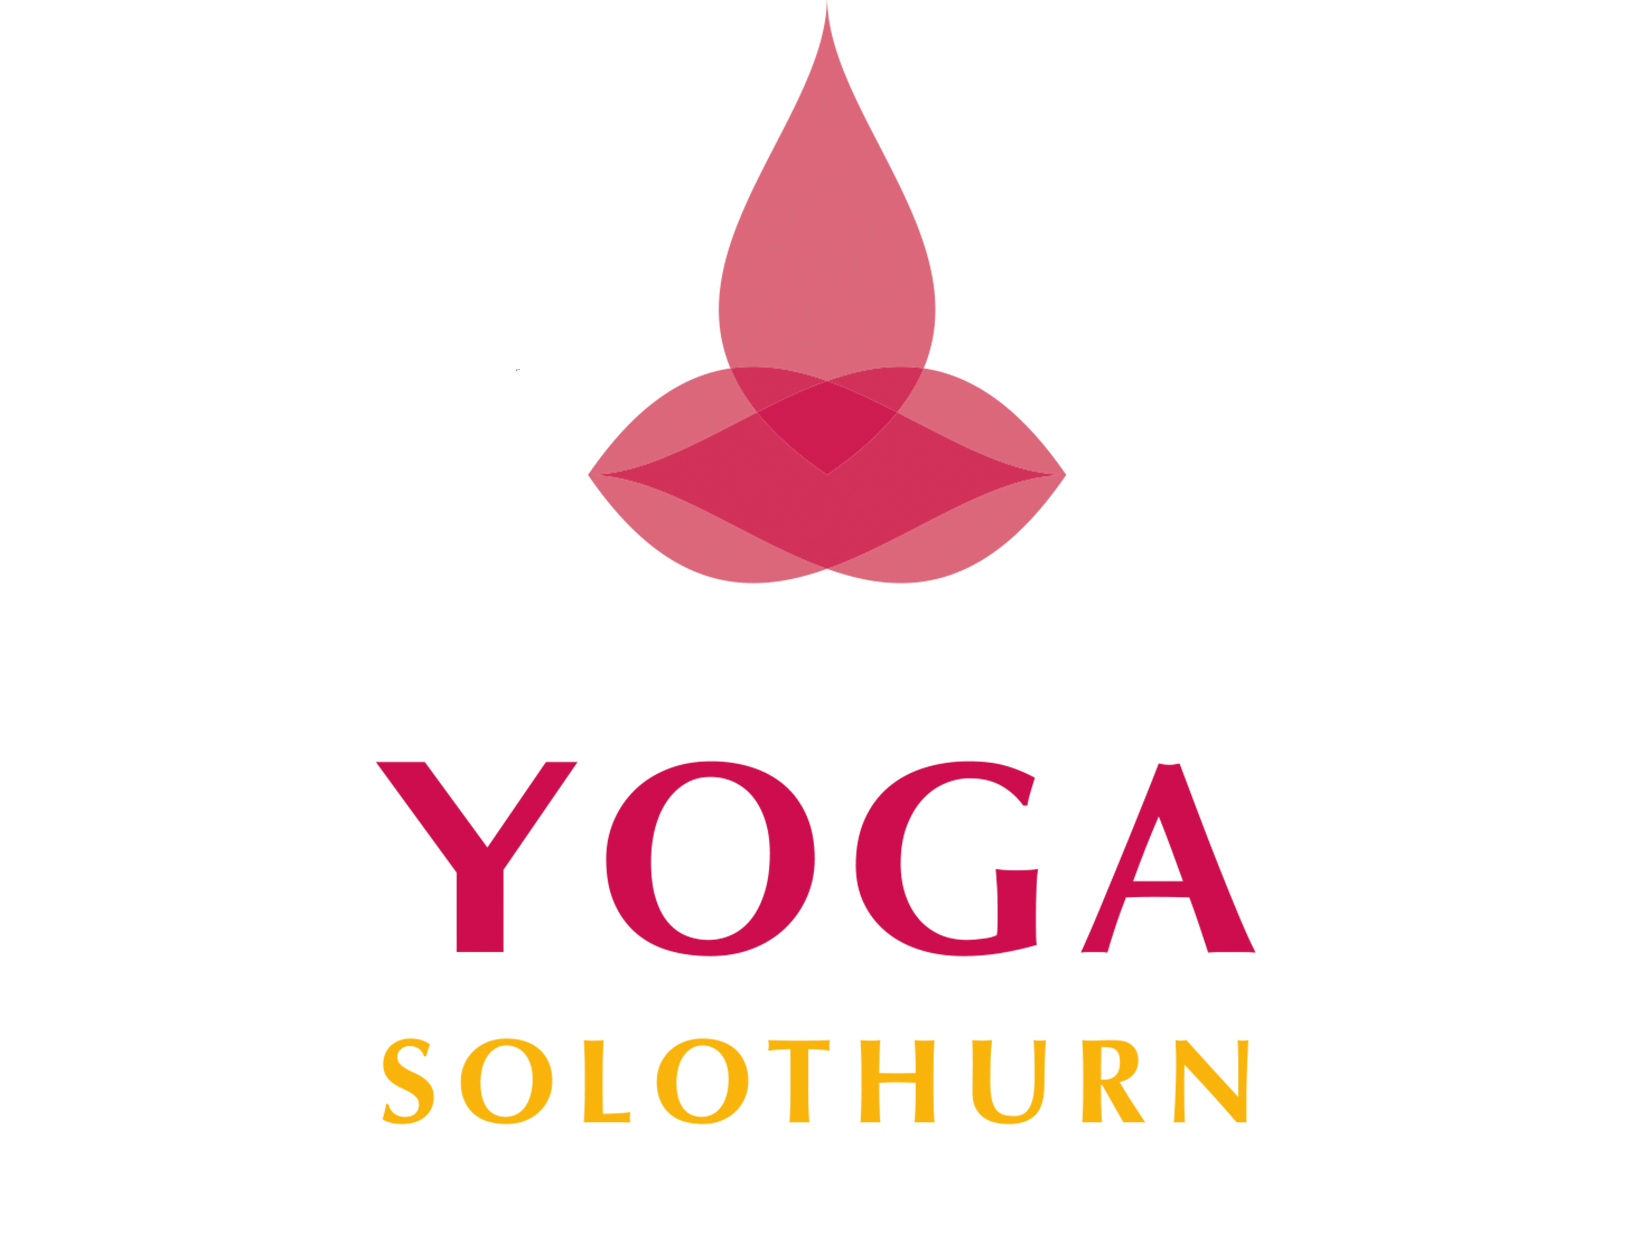 Yoga Solothurn Moloka Art Direction And Graphic Design World Wide From Berlin Germany